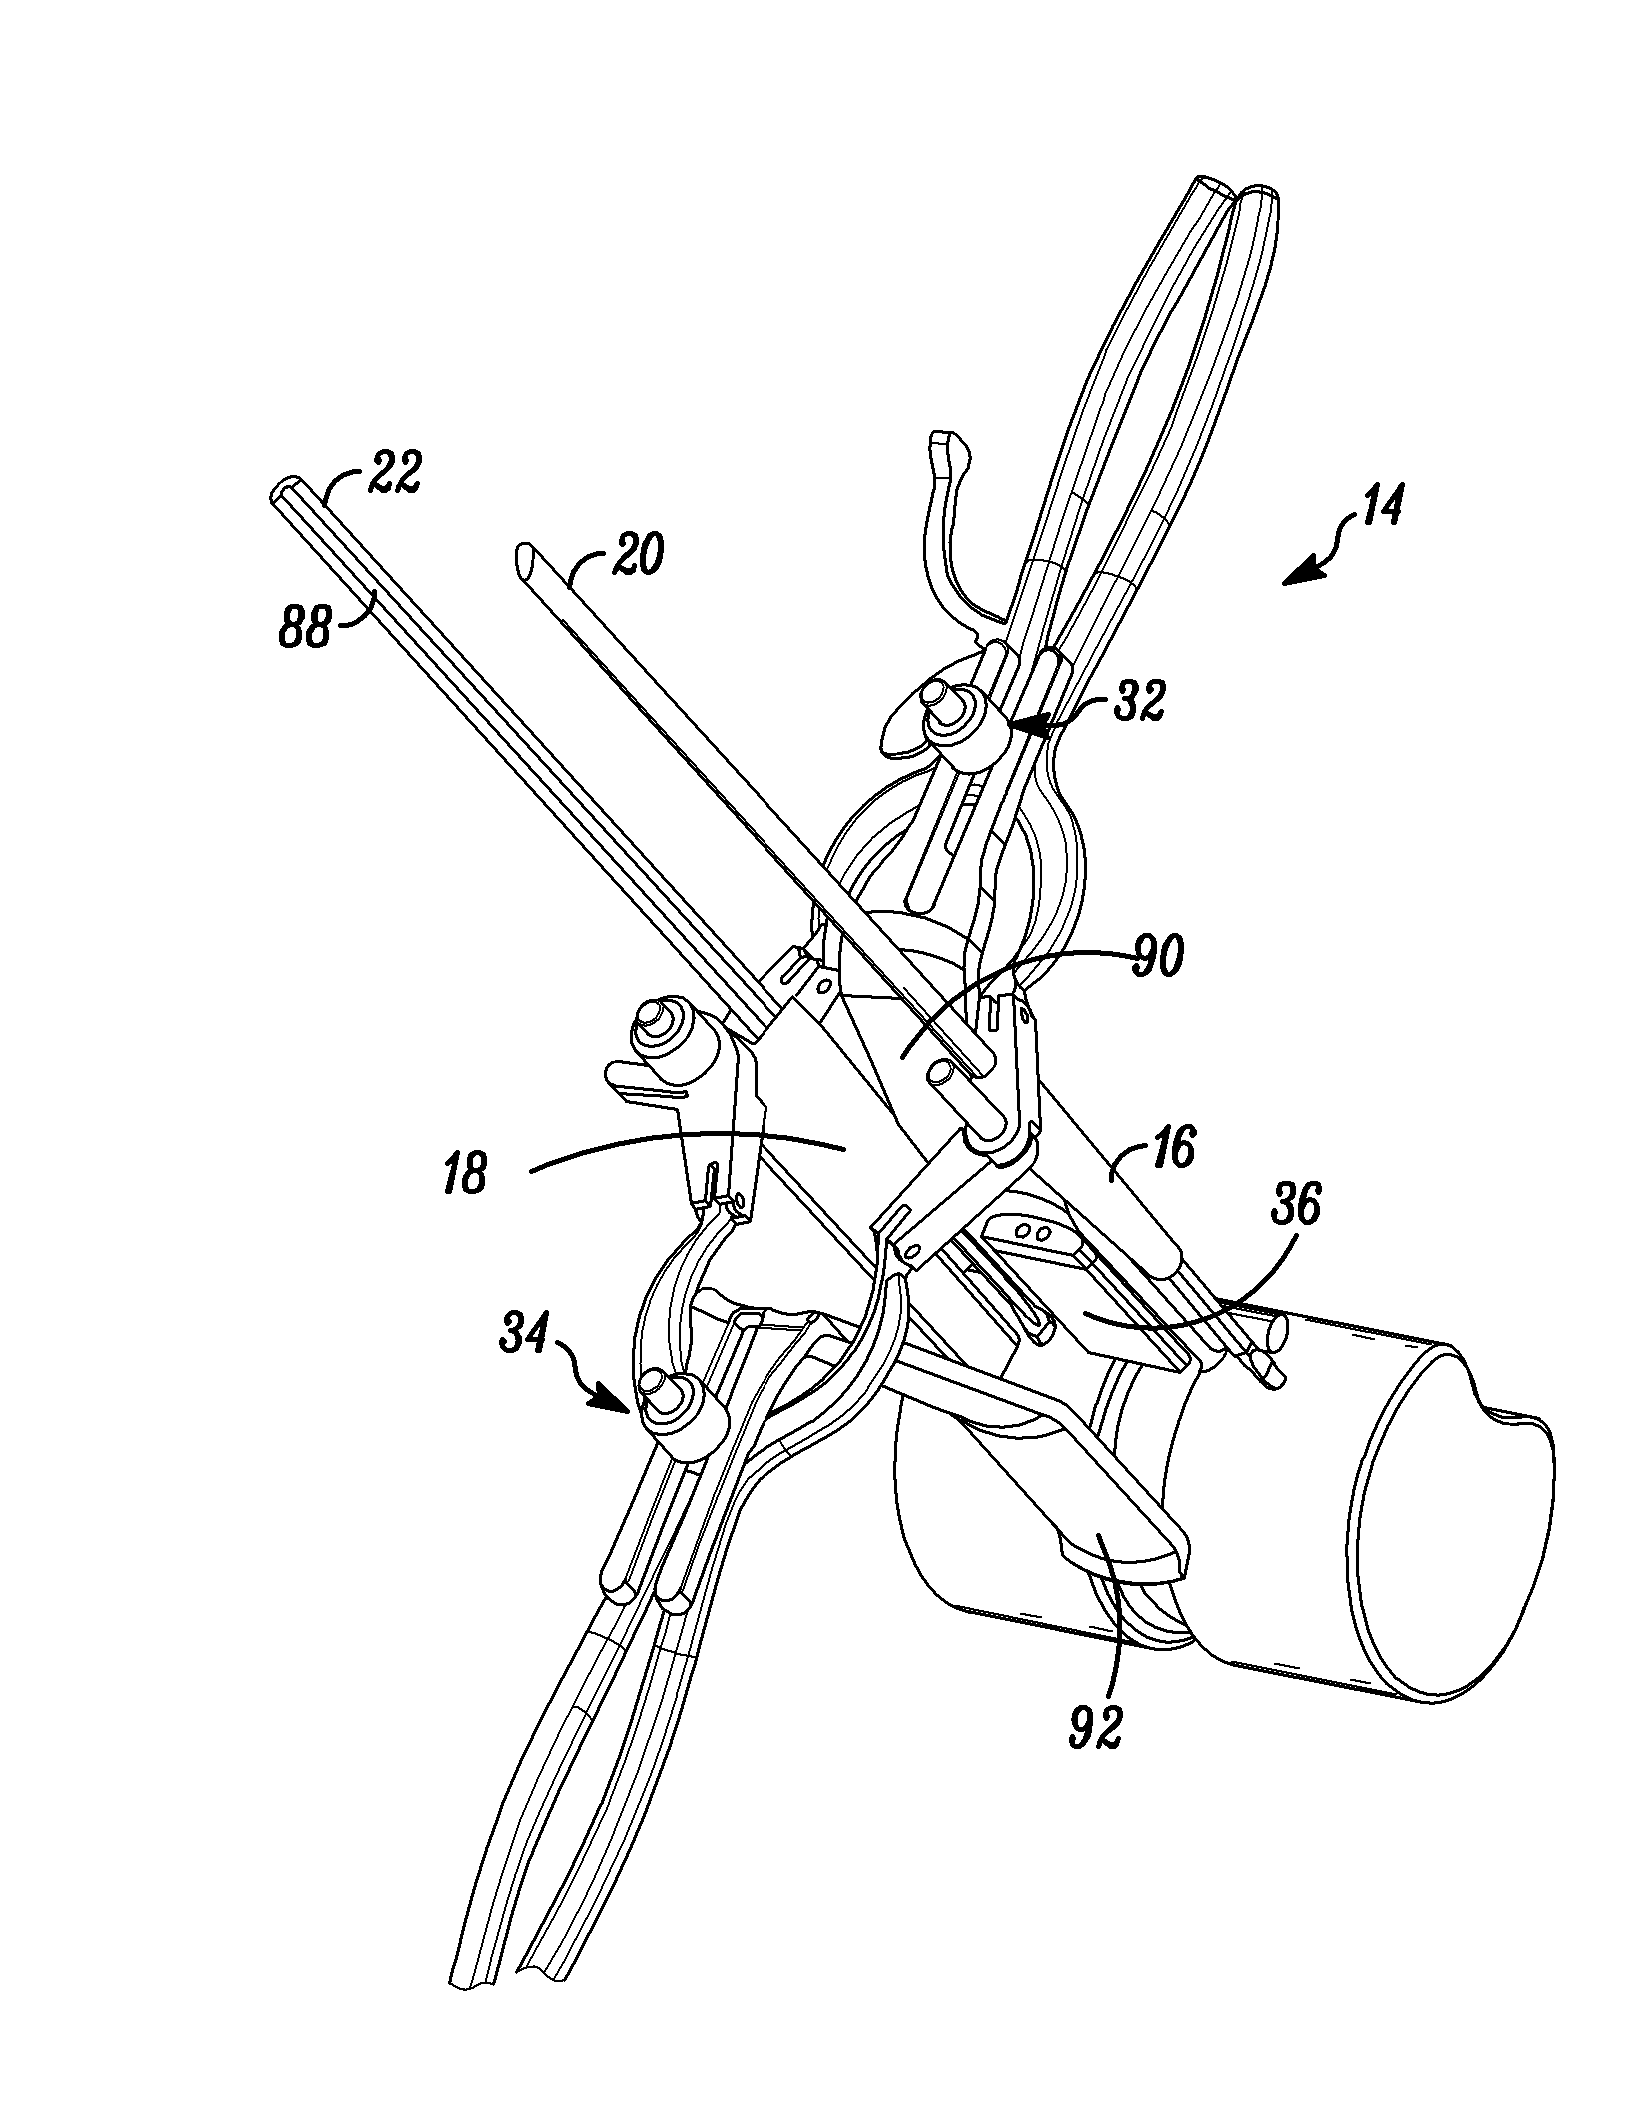 Surgical Access System and Related Methods